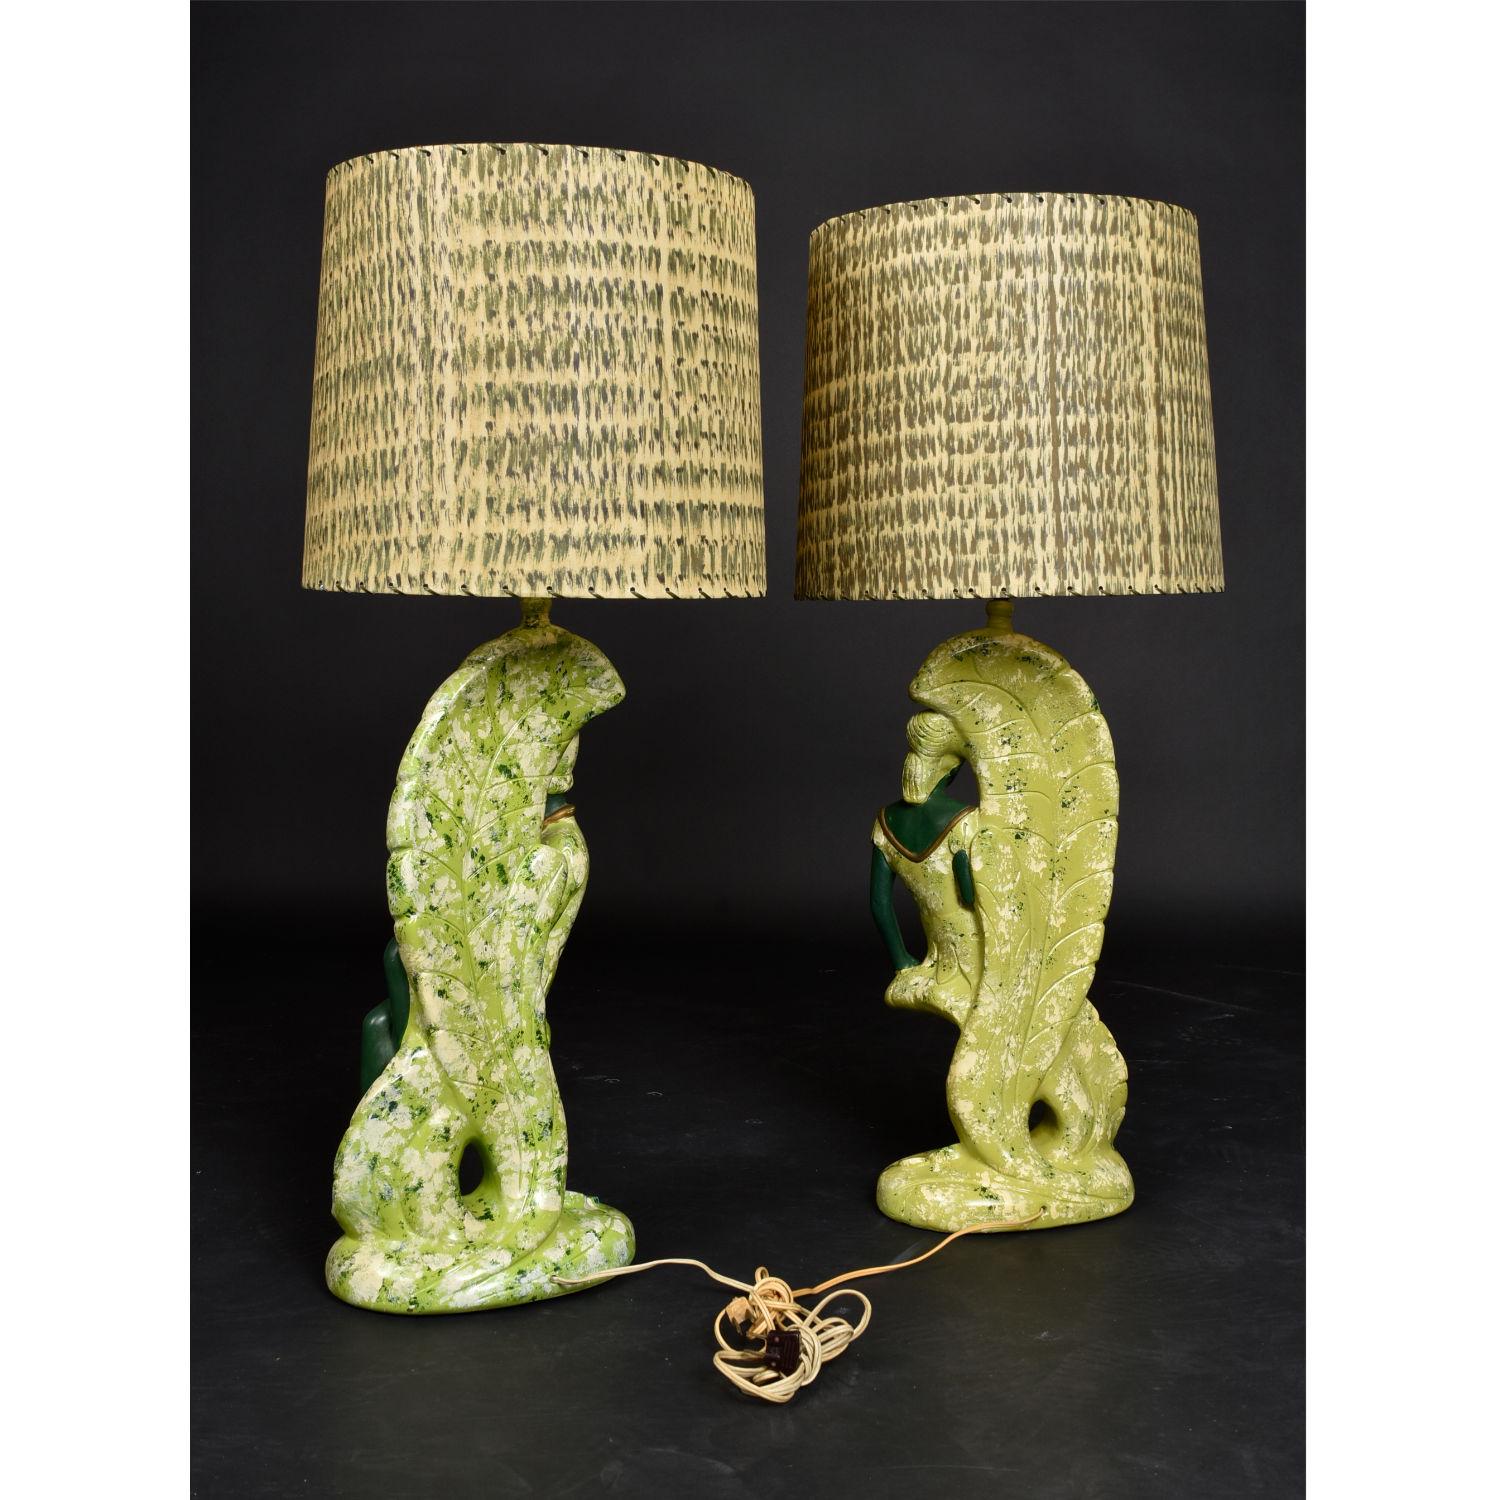 Pair of Continental Art Co. green fairy lamps. Vintage 1950s complete with fiberglass lamp shades. You’d be hard pressed to find a finer examples of early mid-century modern kitsch. We use the term “kitsch” with the utmost esteem, these are truly